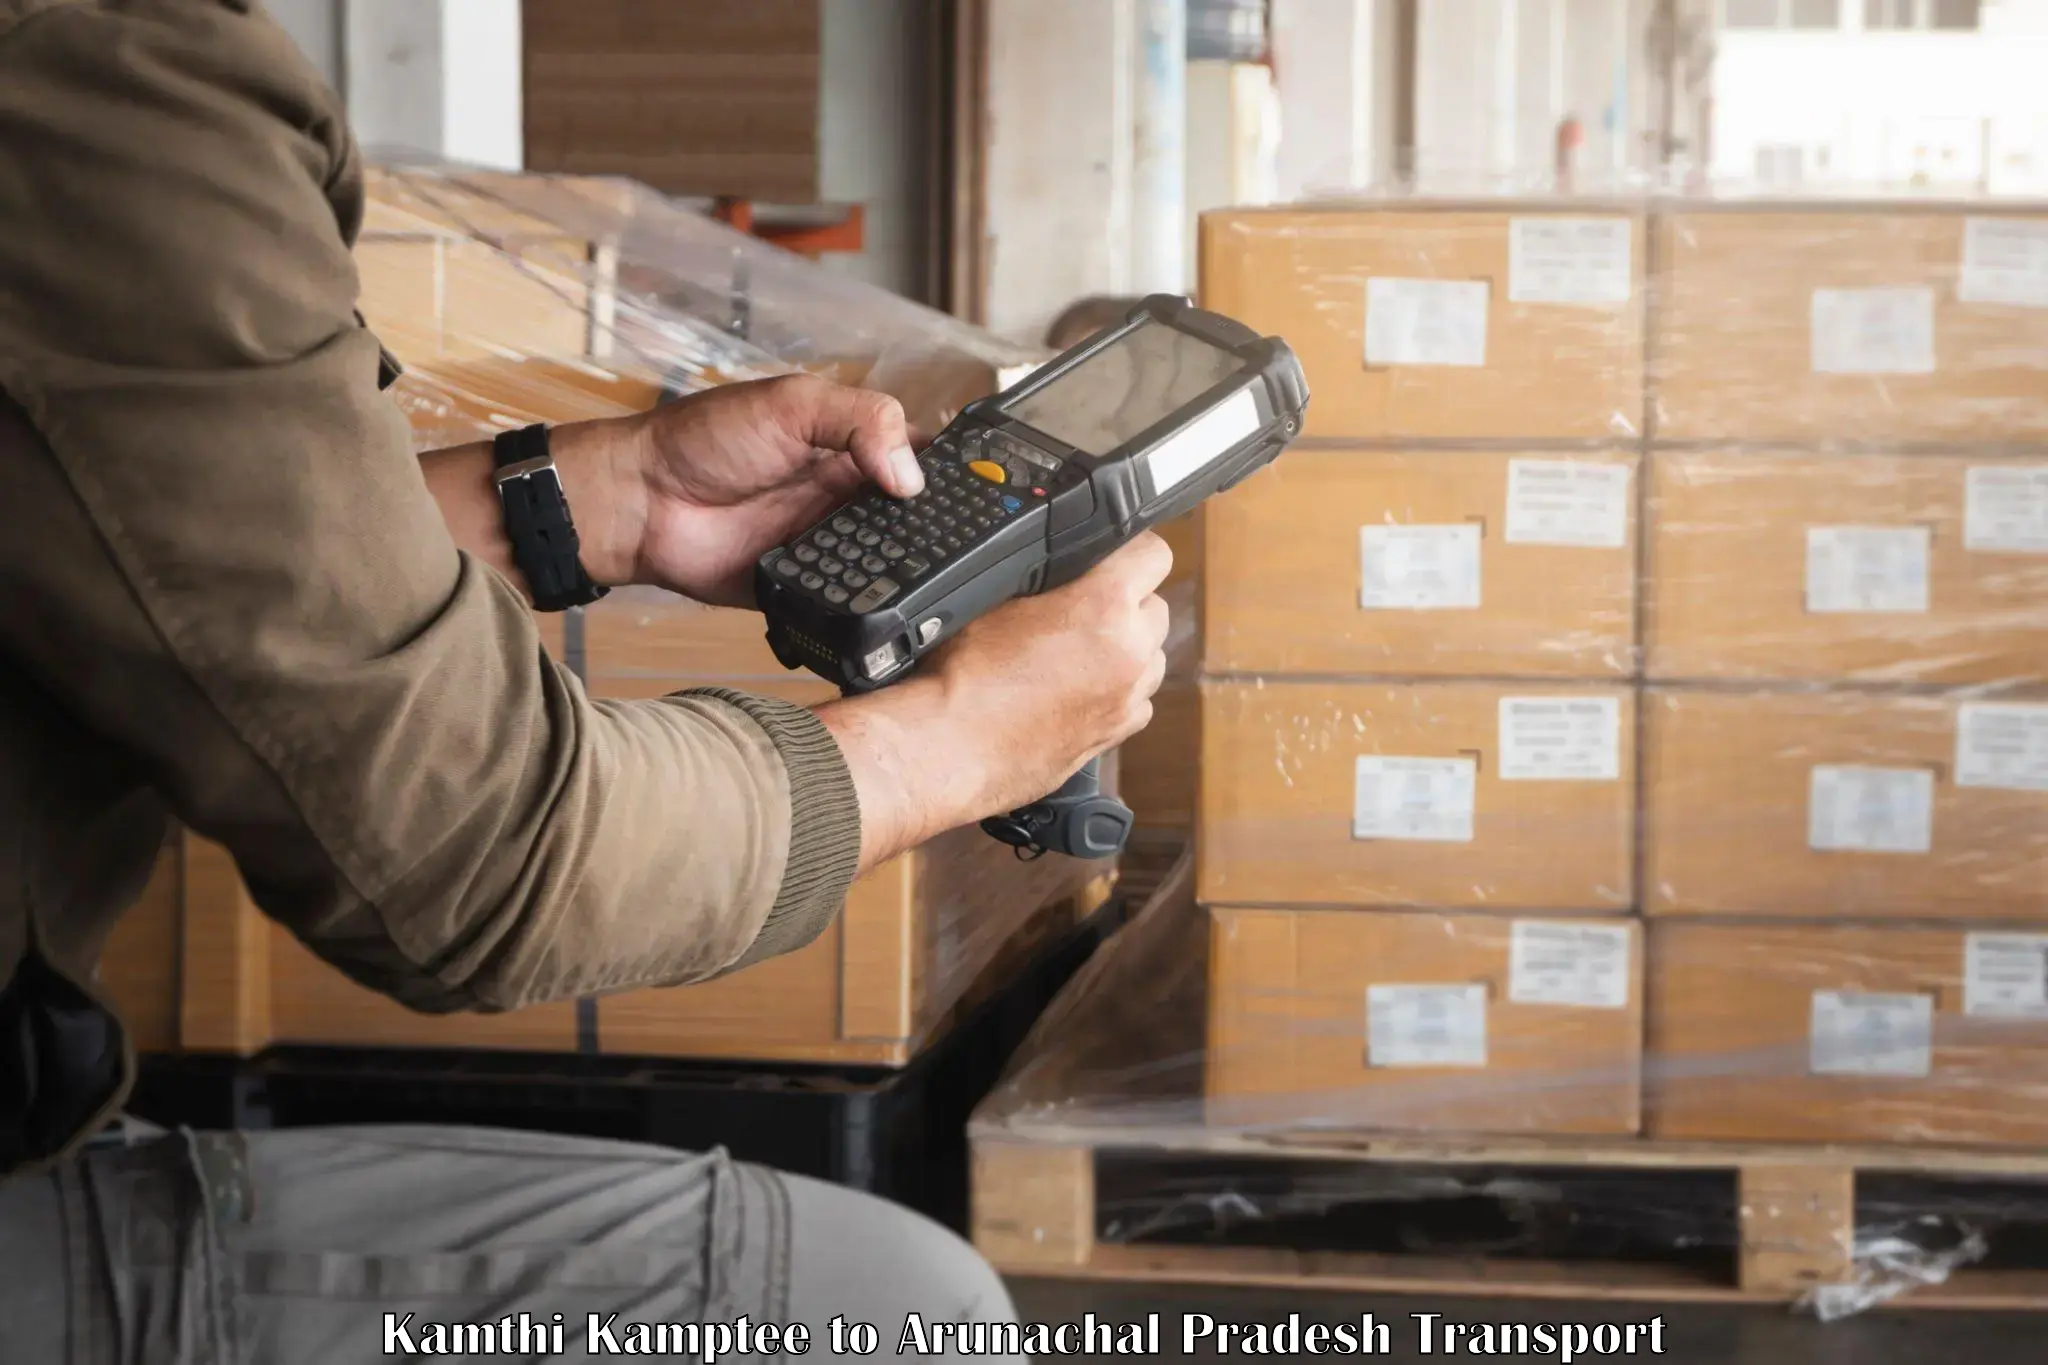 Truck transport companies in India Kamthi Kamptee to Lohit